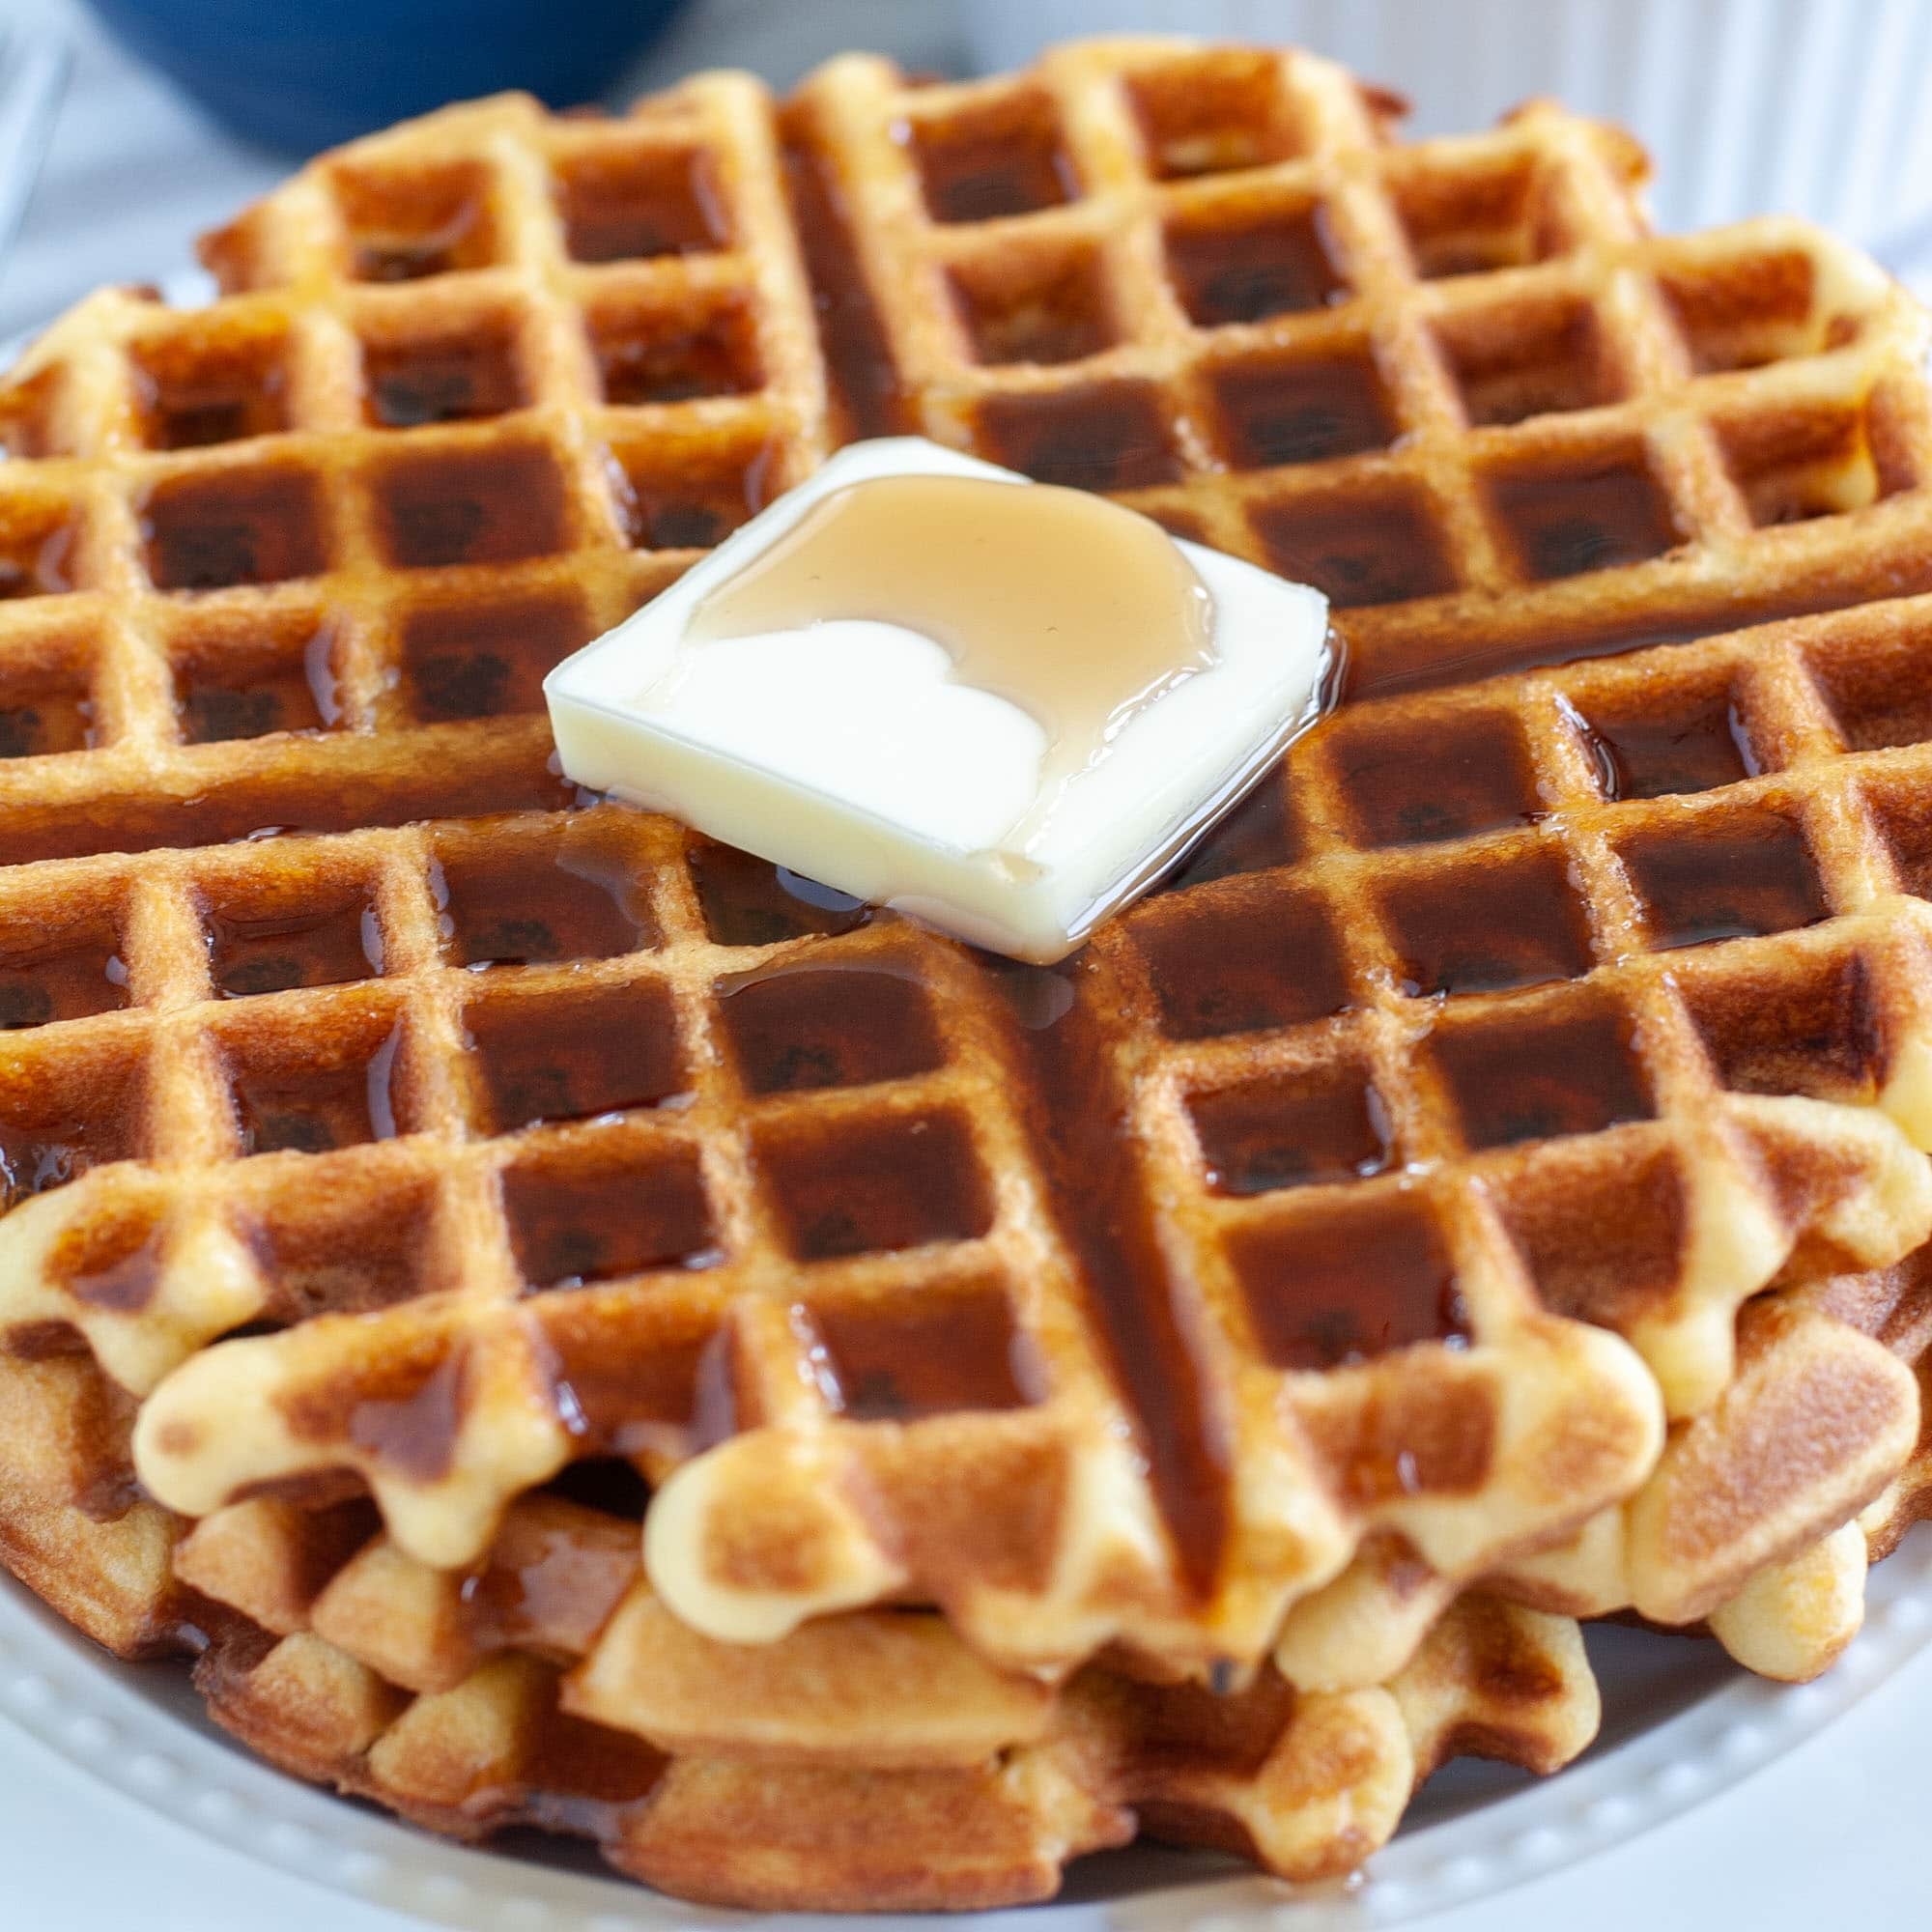 DIY Mcdonald's-inspired breakfasts and more with this Cuisinart waffle maker